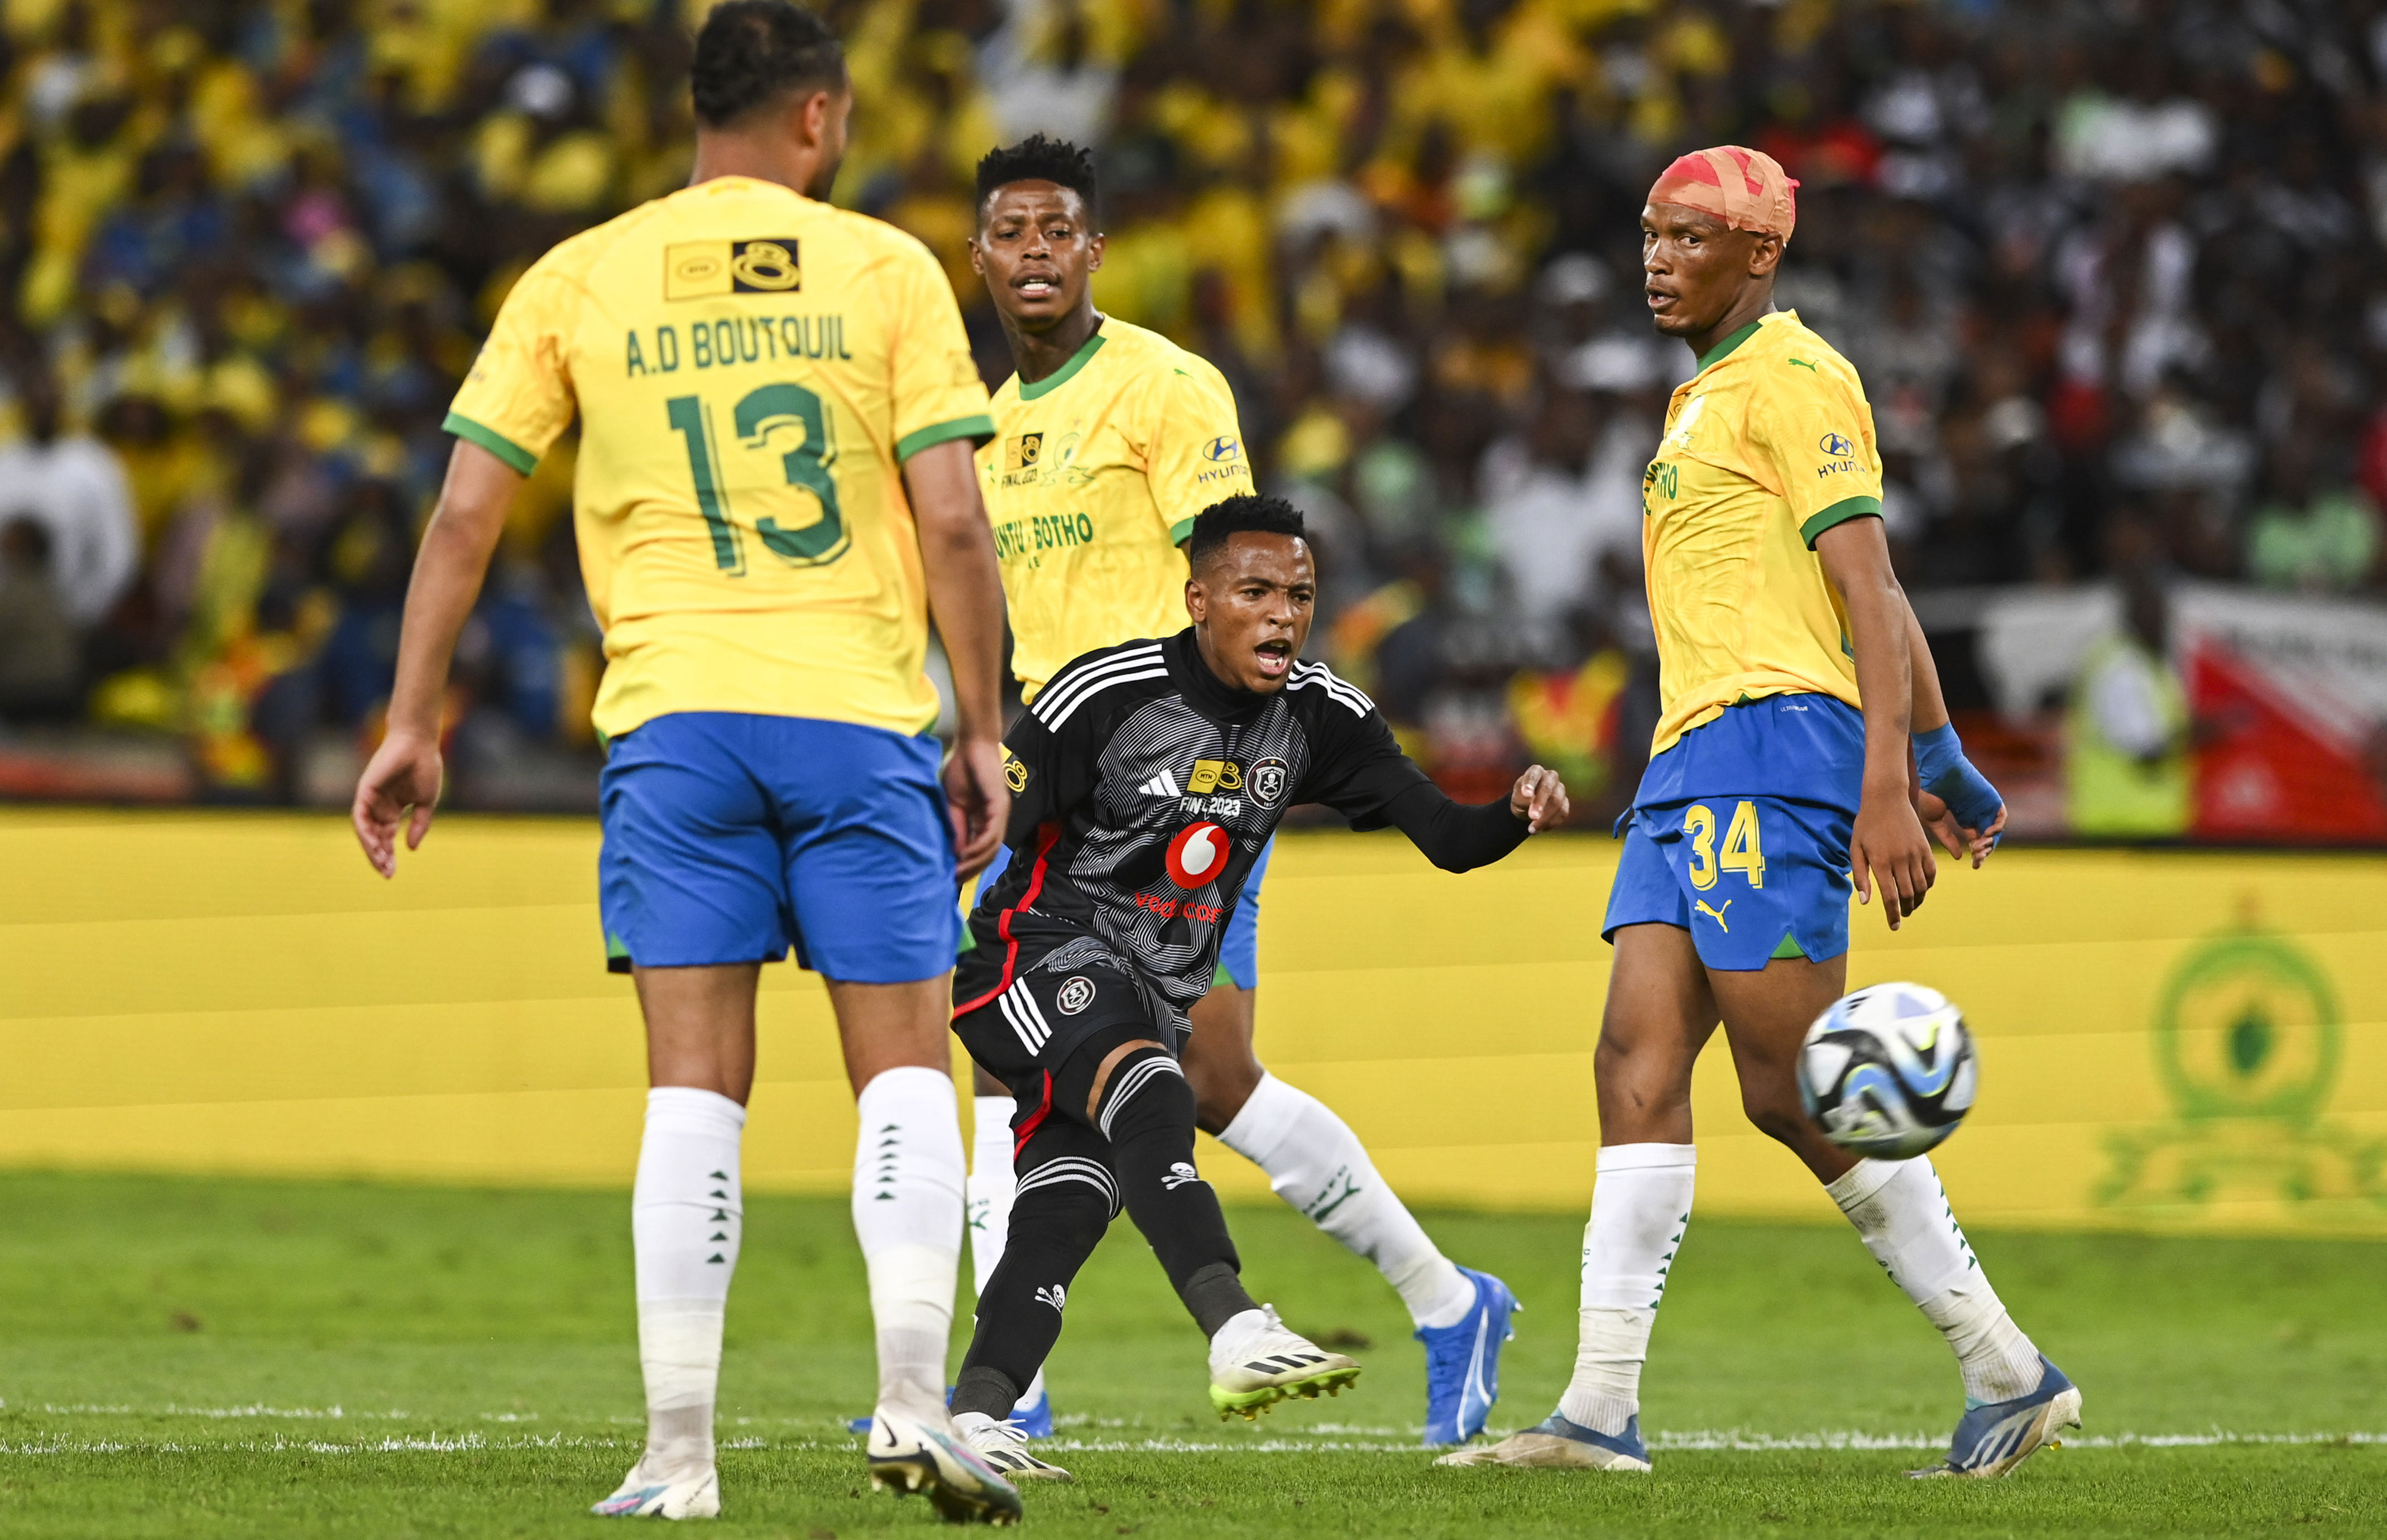 sundowns to clash swords with pirates in mouthwatering marquee fixture as dstv premiership returns